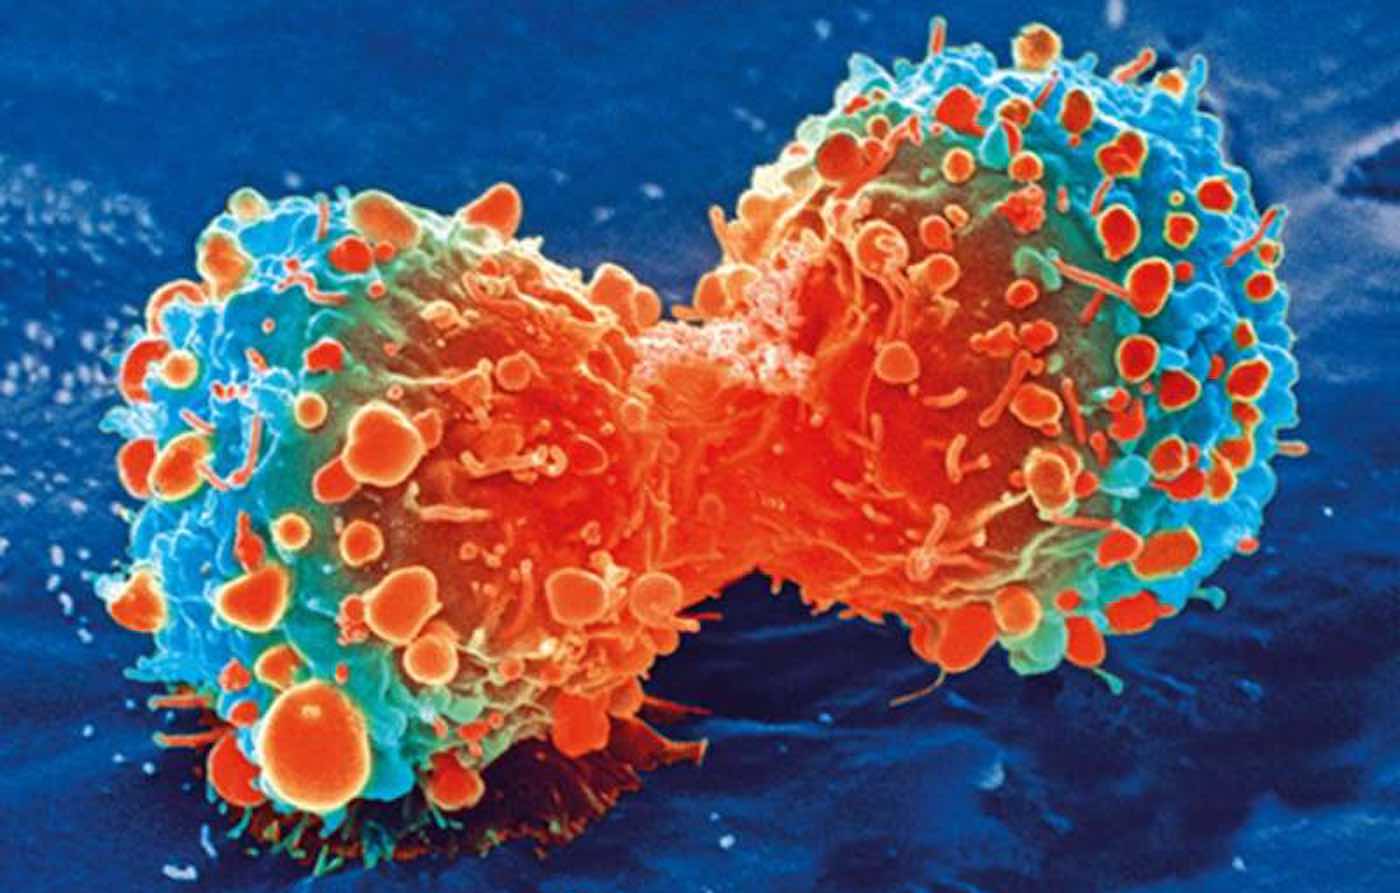 Revolutionary CRISPR-based Genome Editing System Destroys Cancer Cells 'Permanently' in Lab - Good News Network